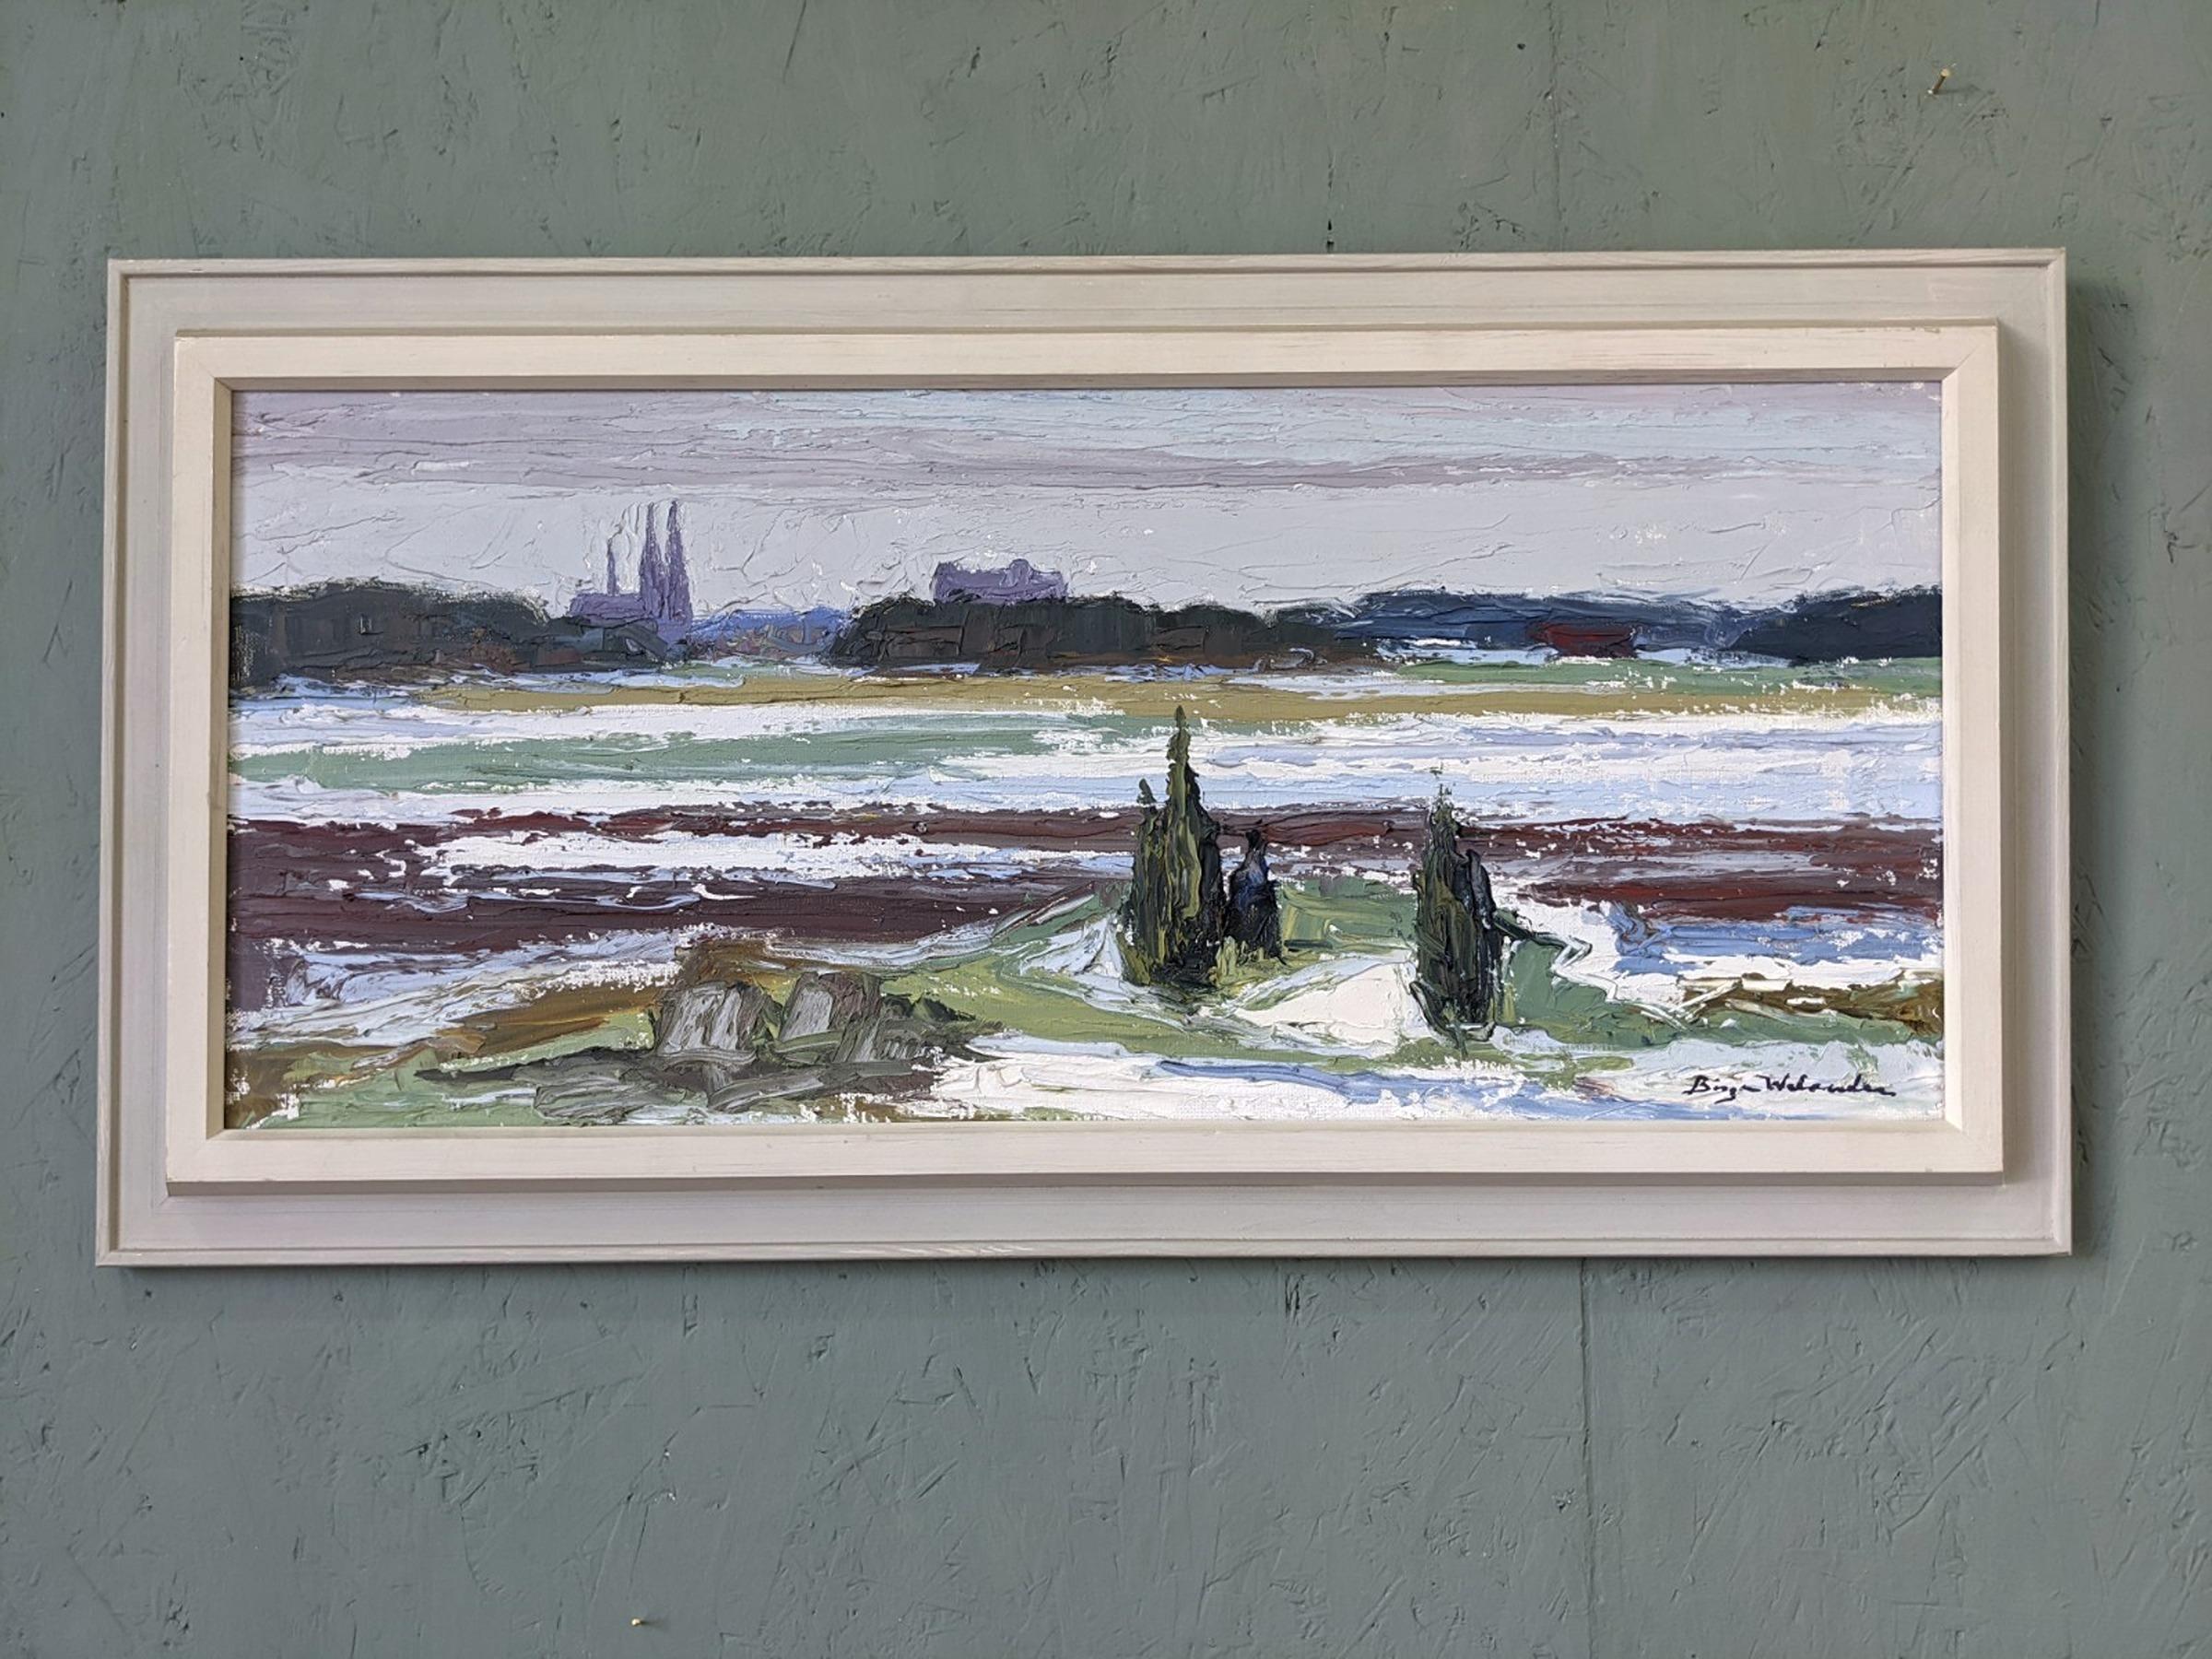 PLANES
Size: 36 x 70 cm (including frame)
Oil on Canvas

A beautifully textured and atmospheric mid-century landscape composition, executed in oil onto canvas.

The painting presents a vast landscape, that is partially snow-covered, and with areas